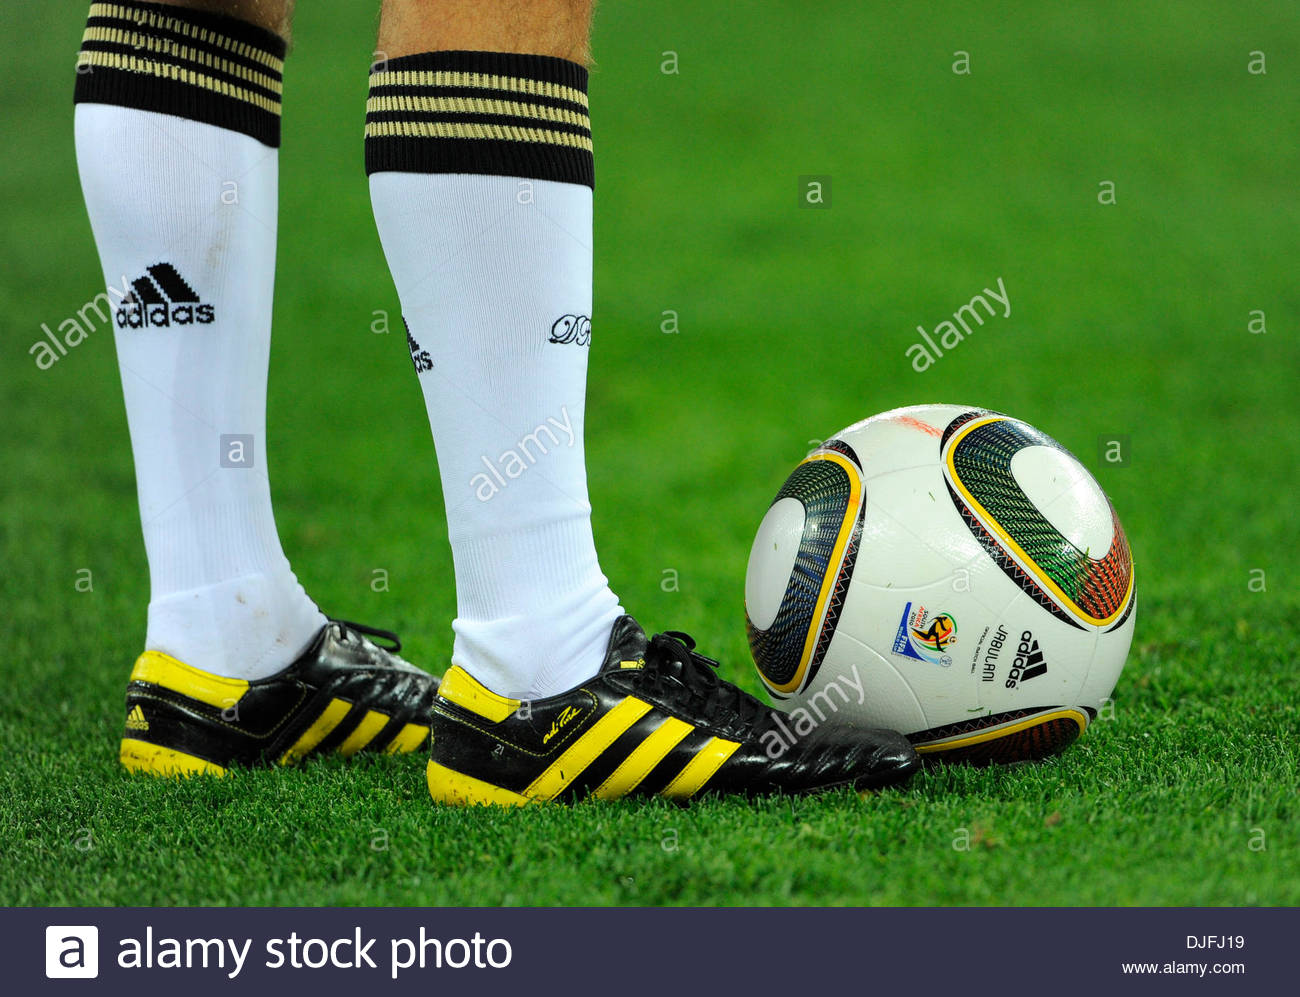 adidas 2010 world cup boots